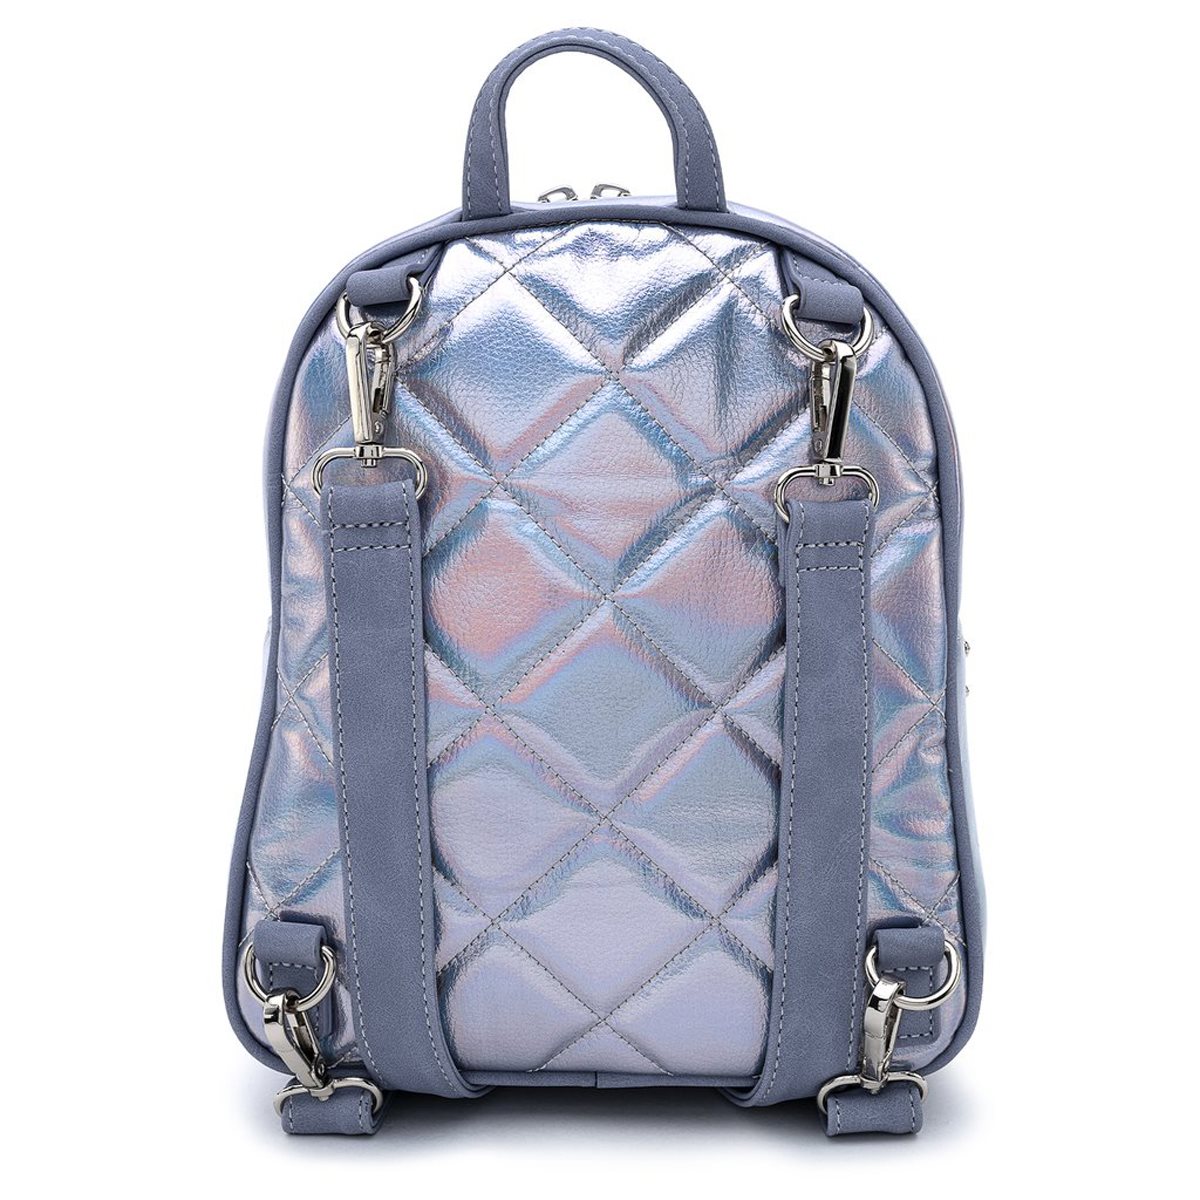 LIGHT YEARS AHEAD BACKPACK (DLXV)